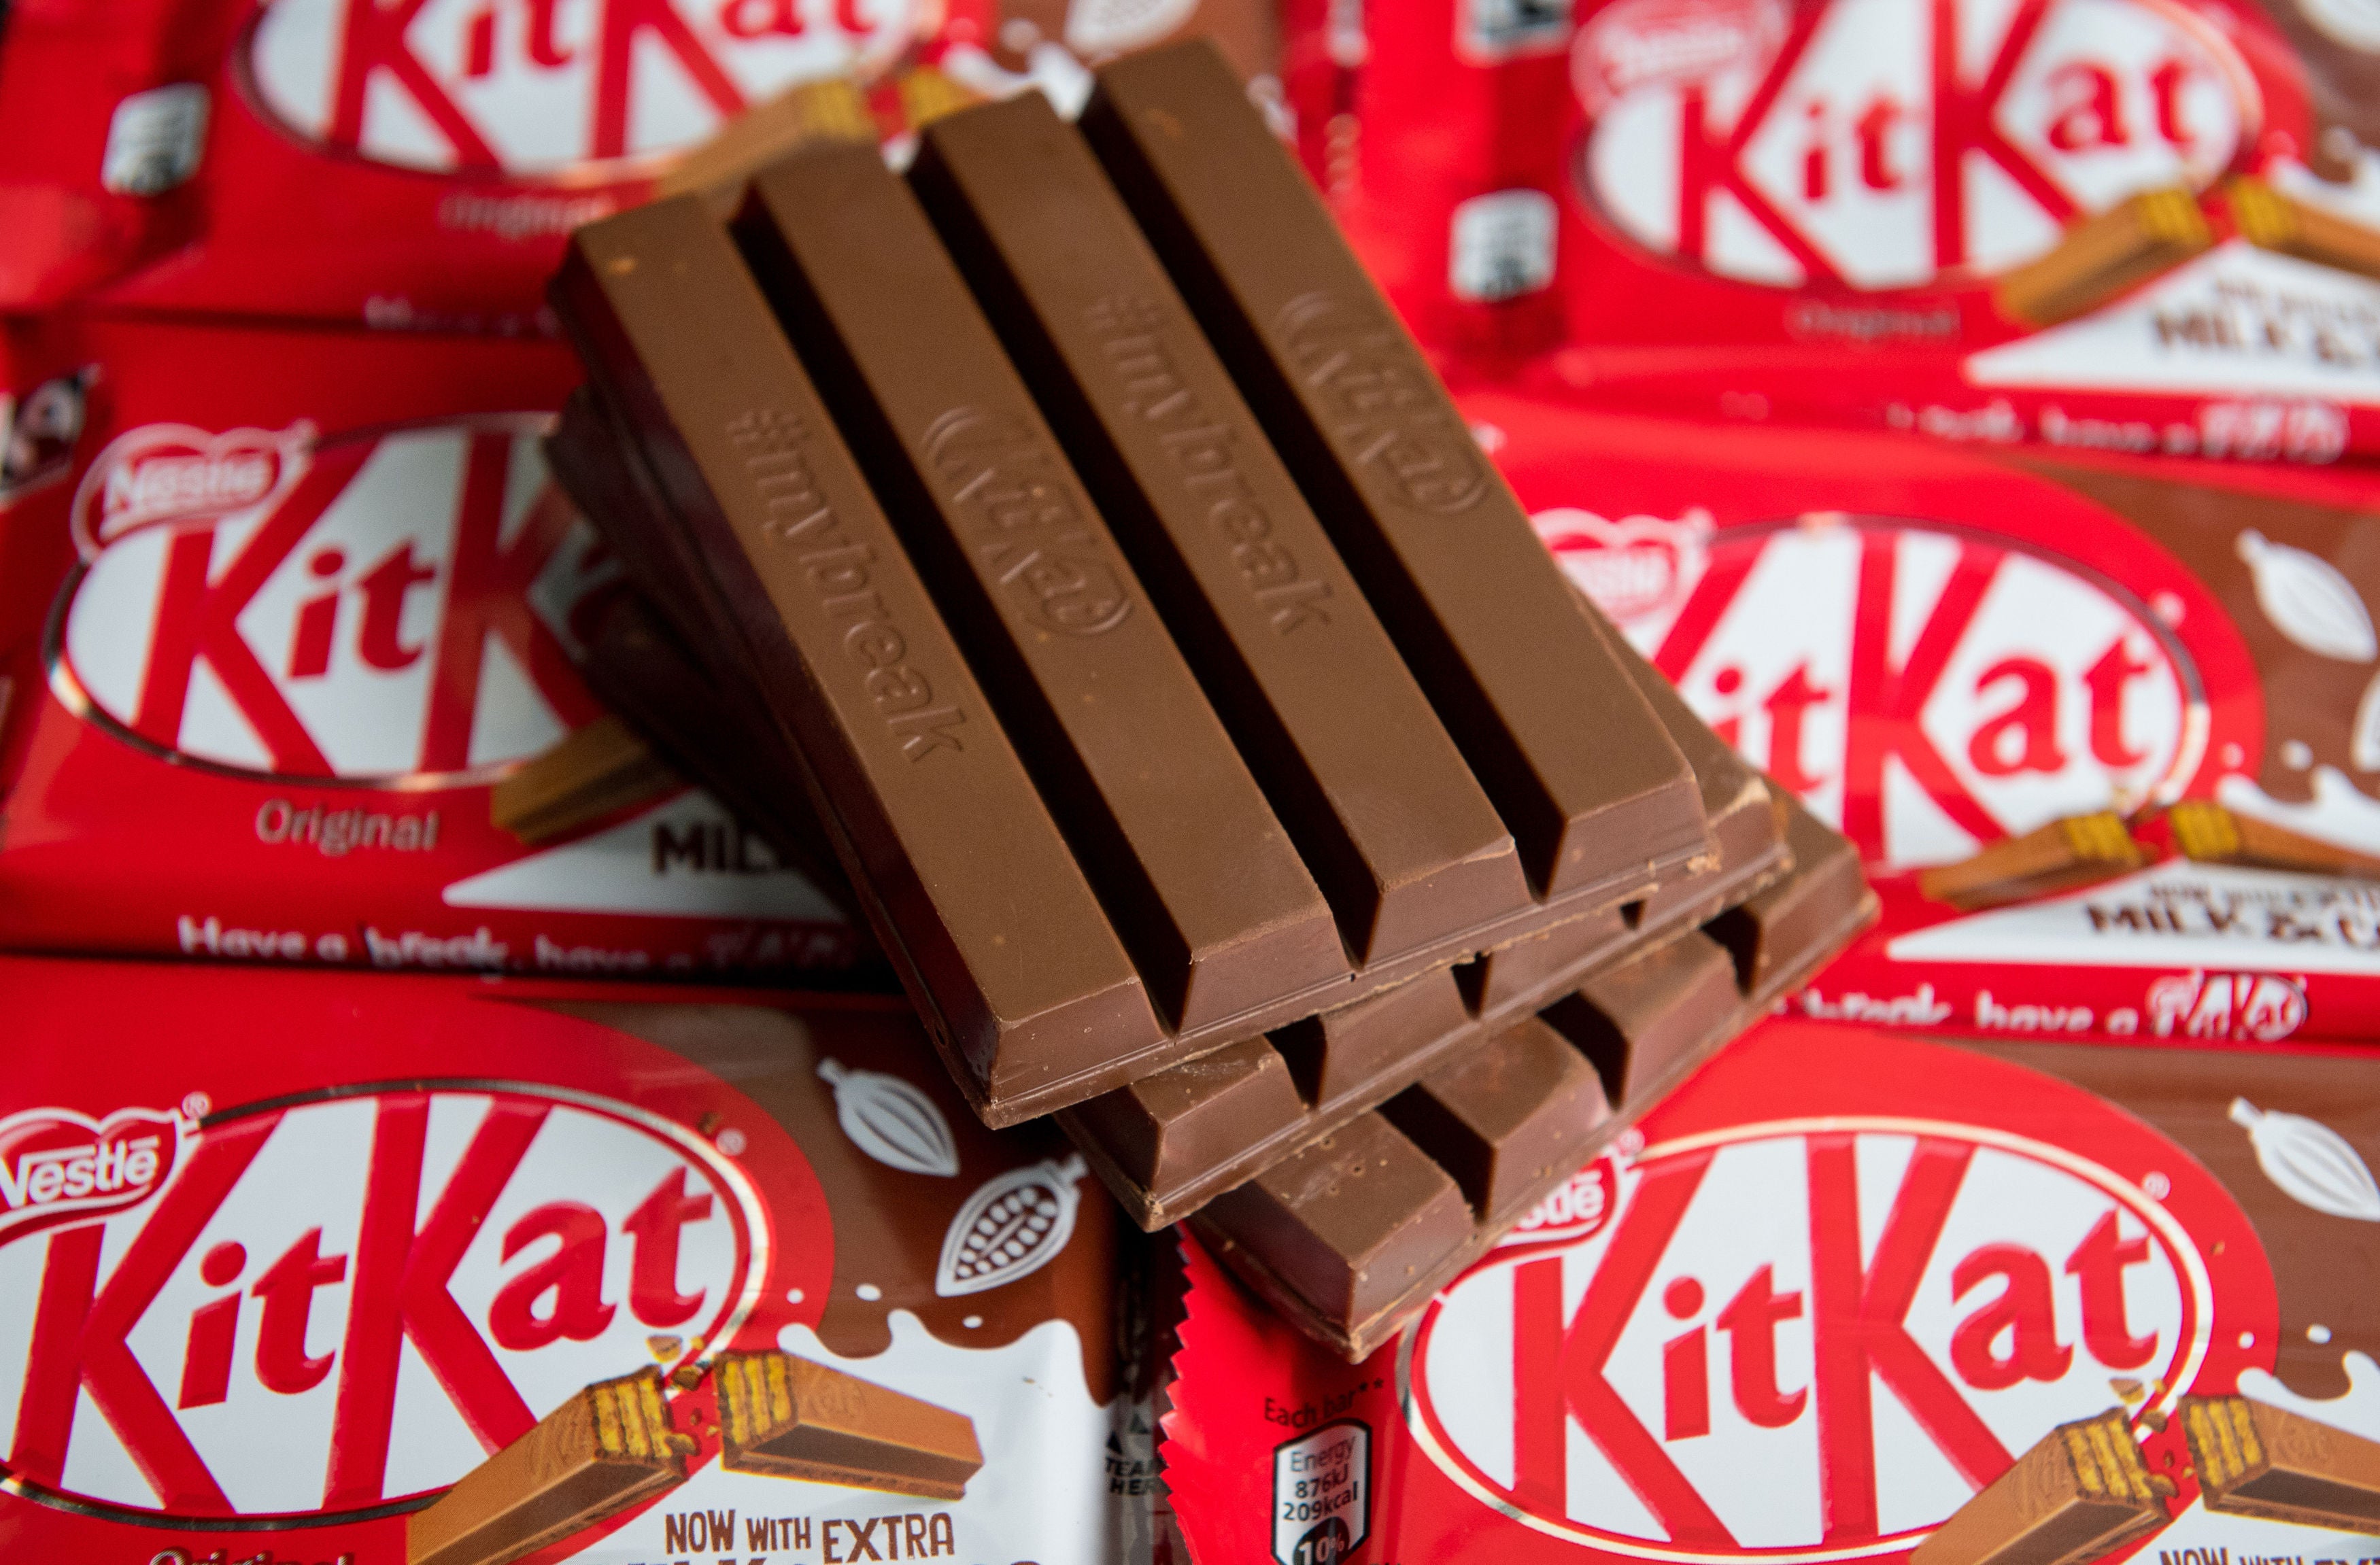 KitKat maker Nestle has warned it could lift prices further